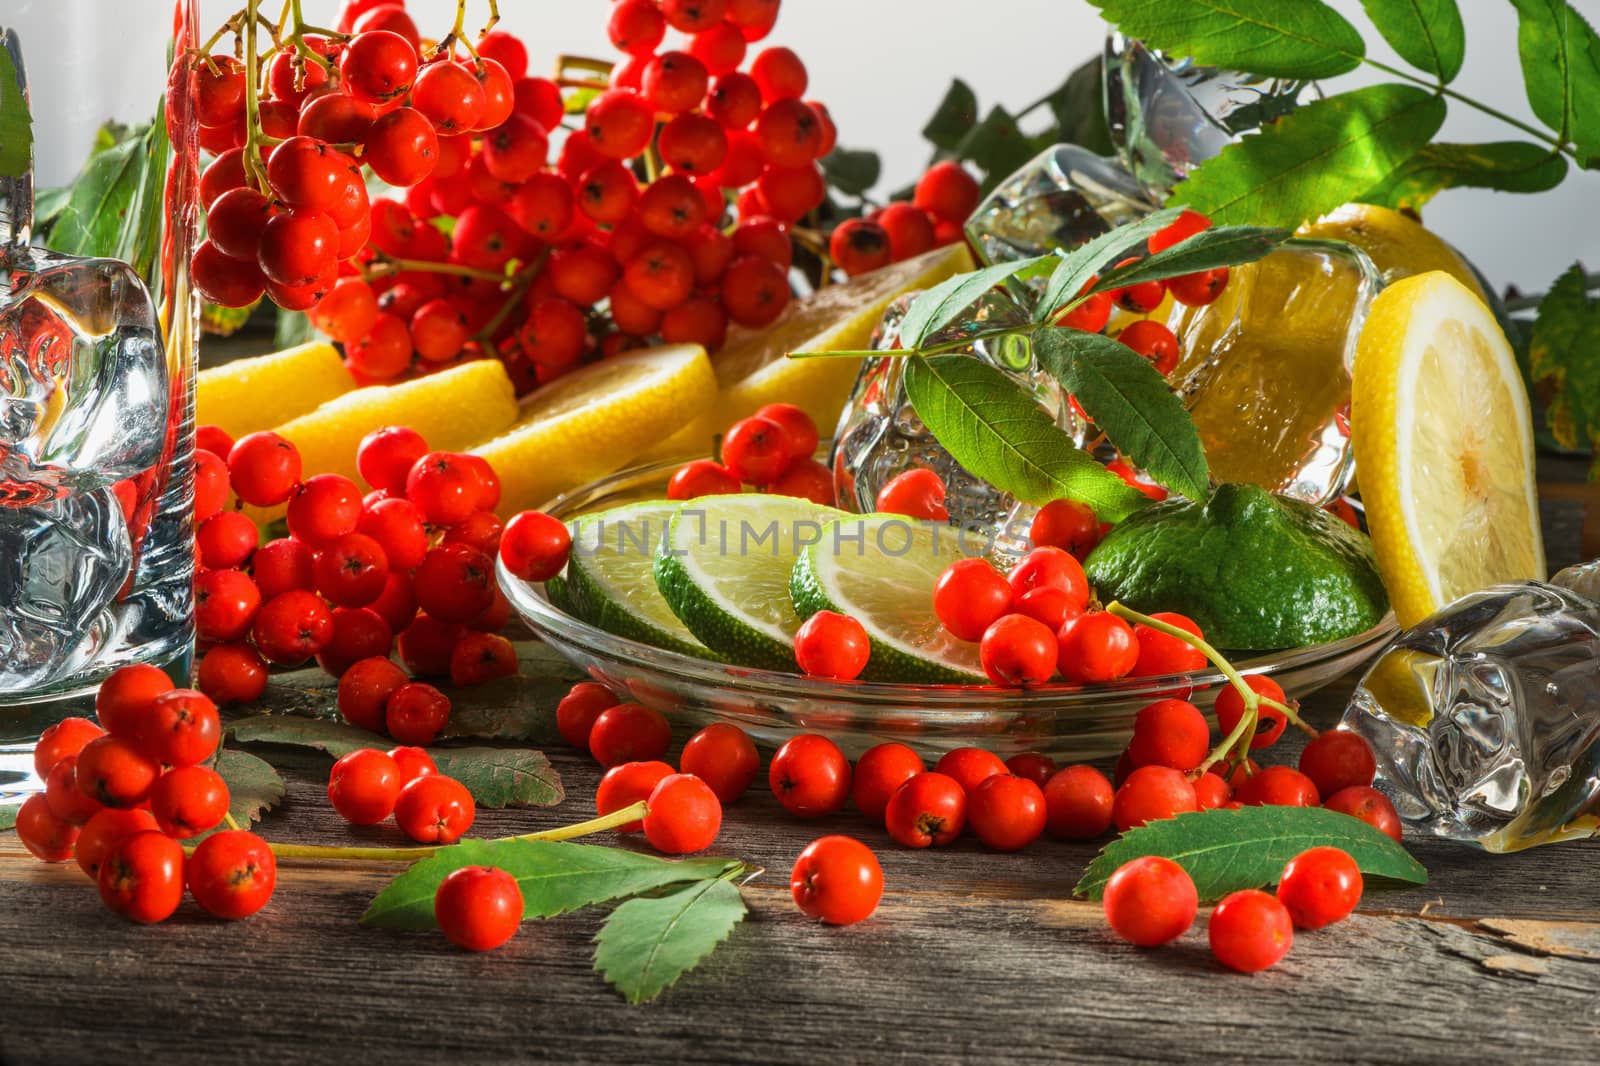 Mountain ash berries on branches with leaves and the cut citrus fruits with ice pieces on a wooden table